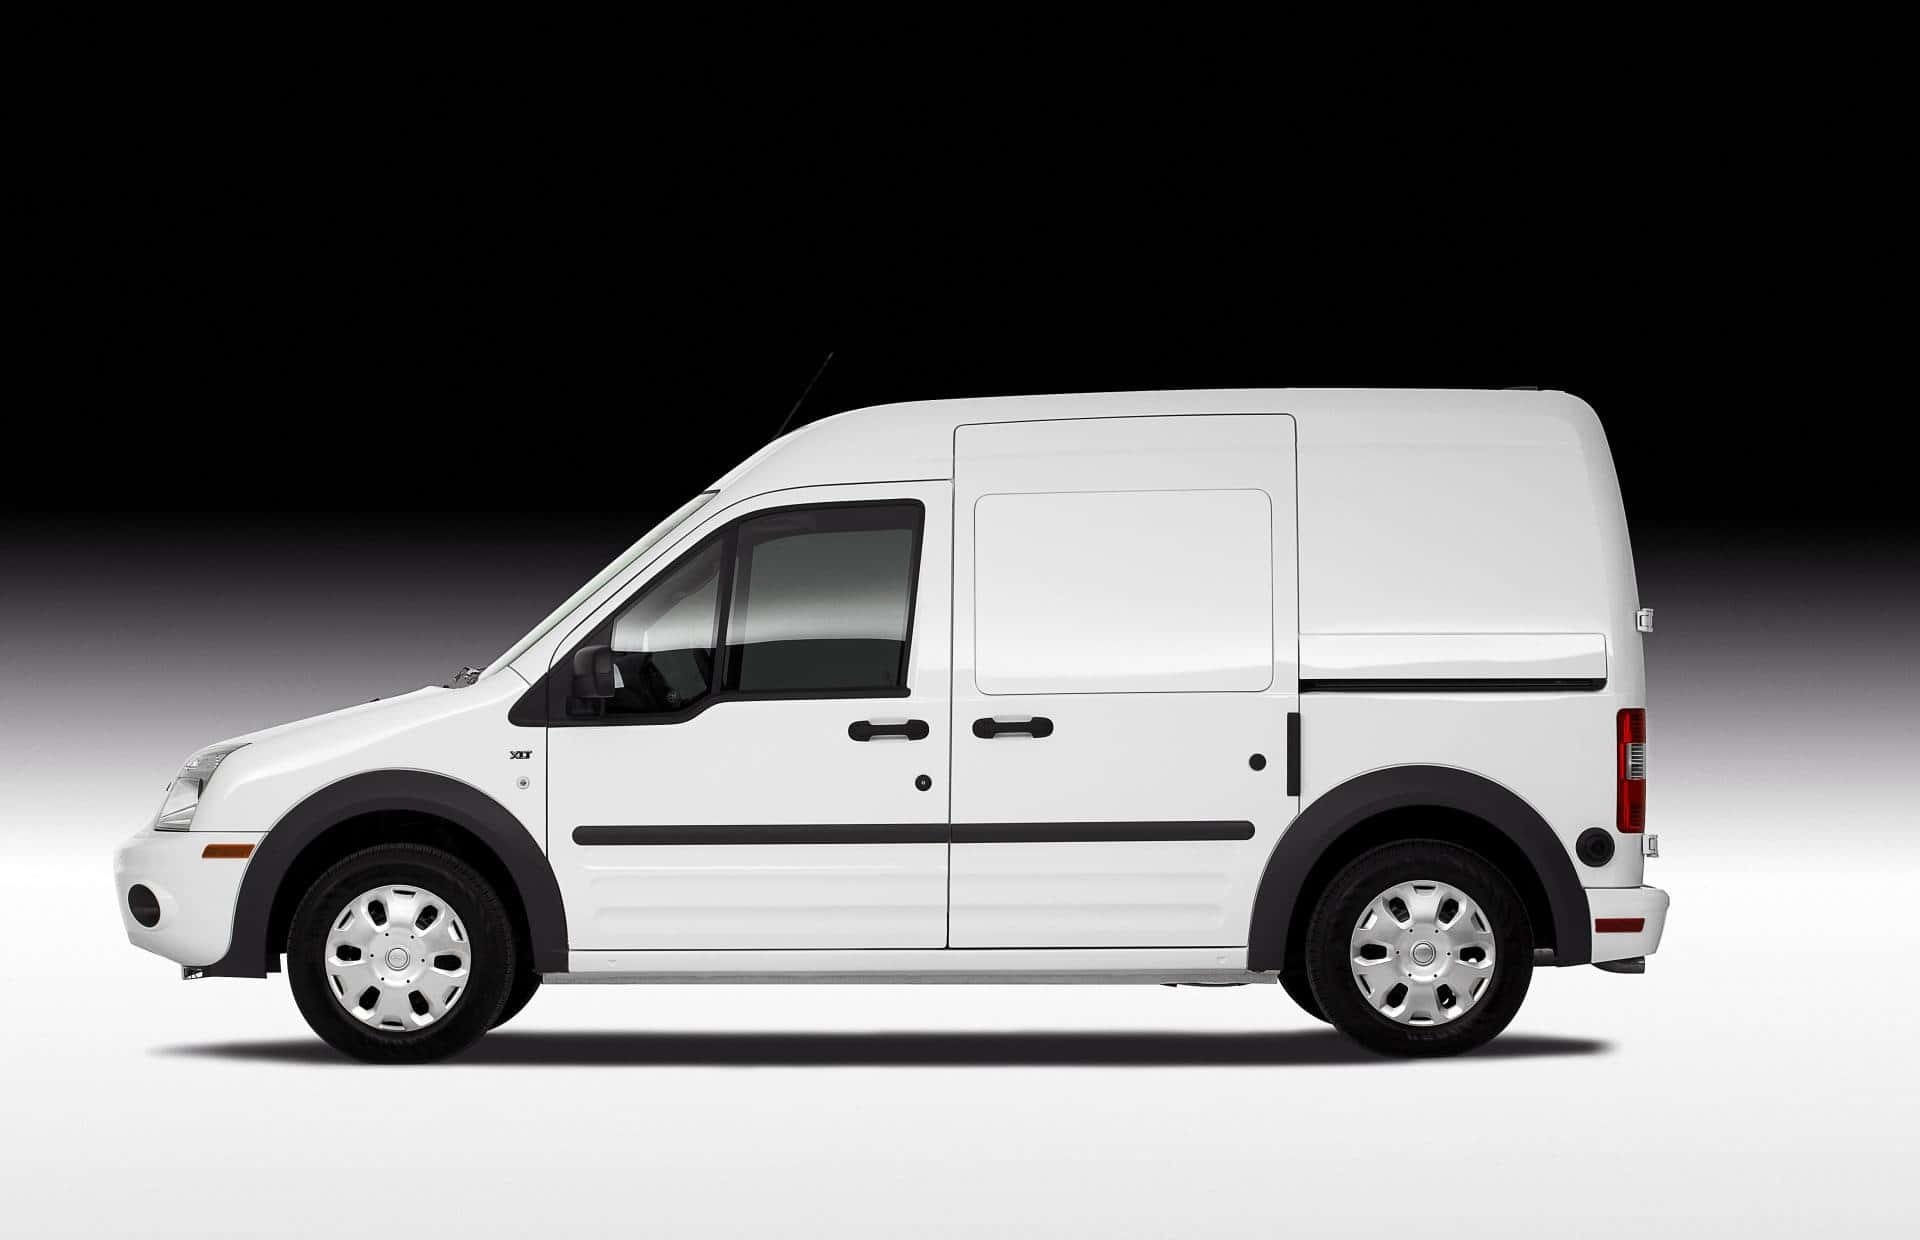 The Ford Transit - Conquering new roads in style and functional utility. Wallpaper